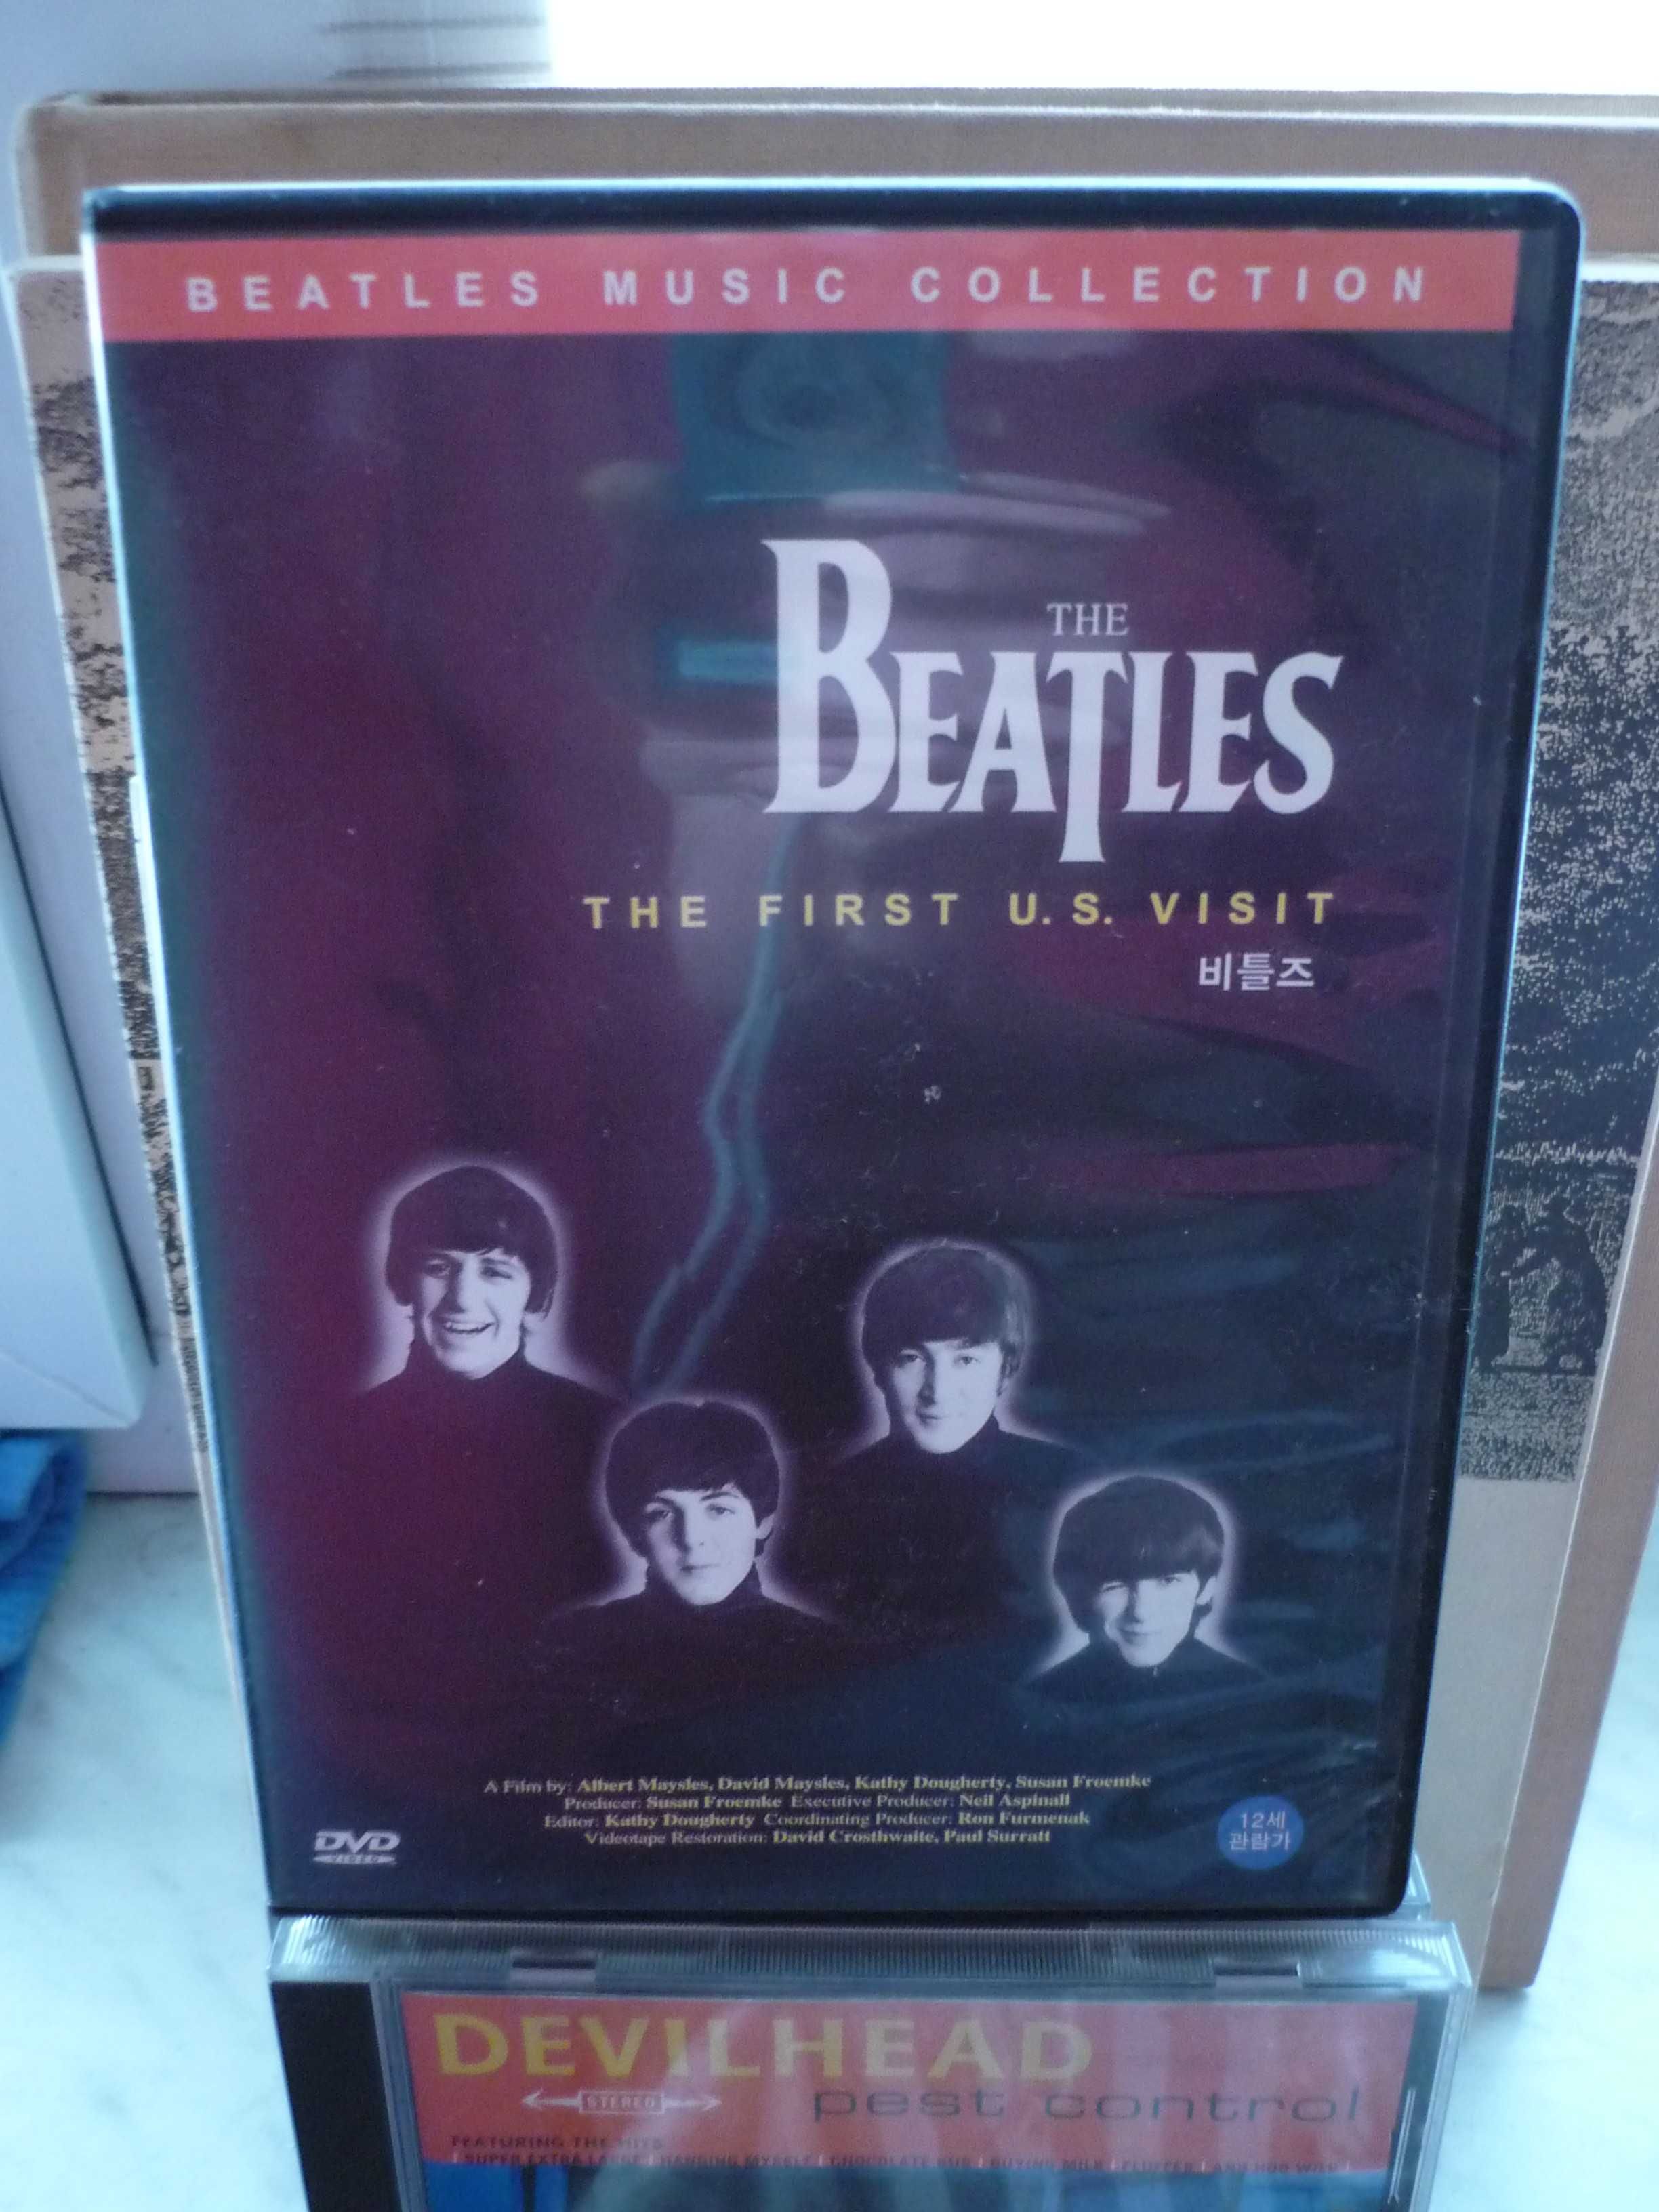 The Beatles The First U,S, Visit , DVD.